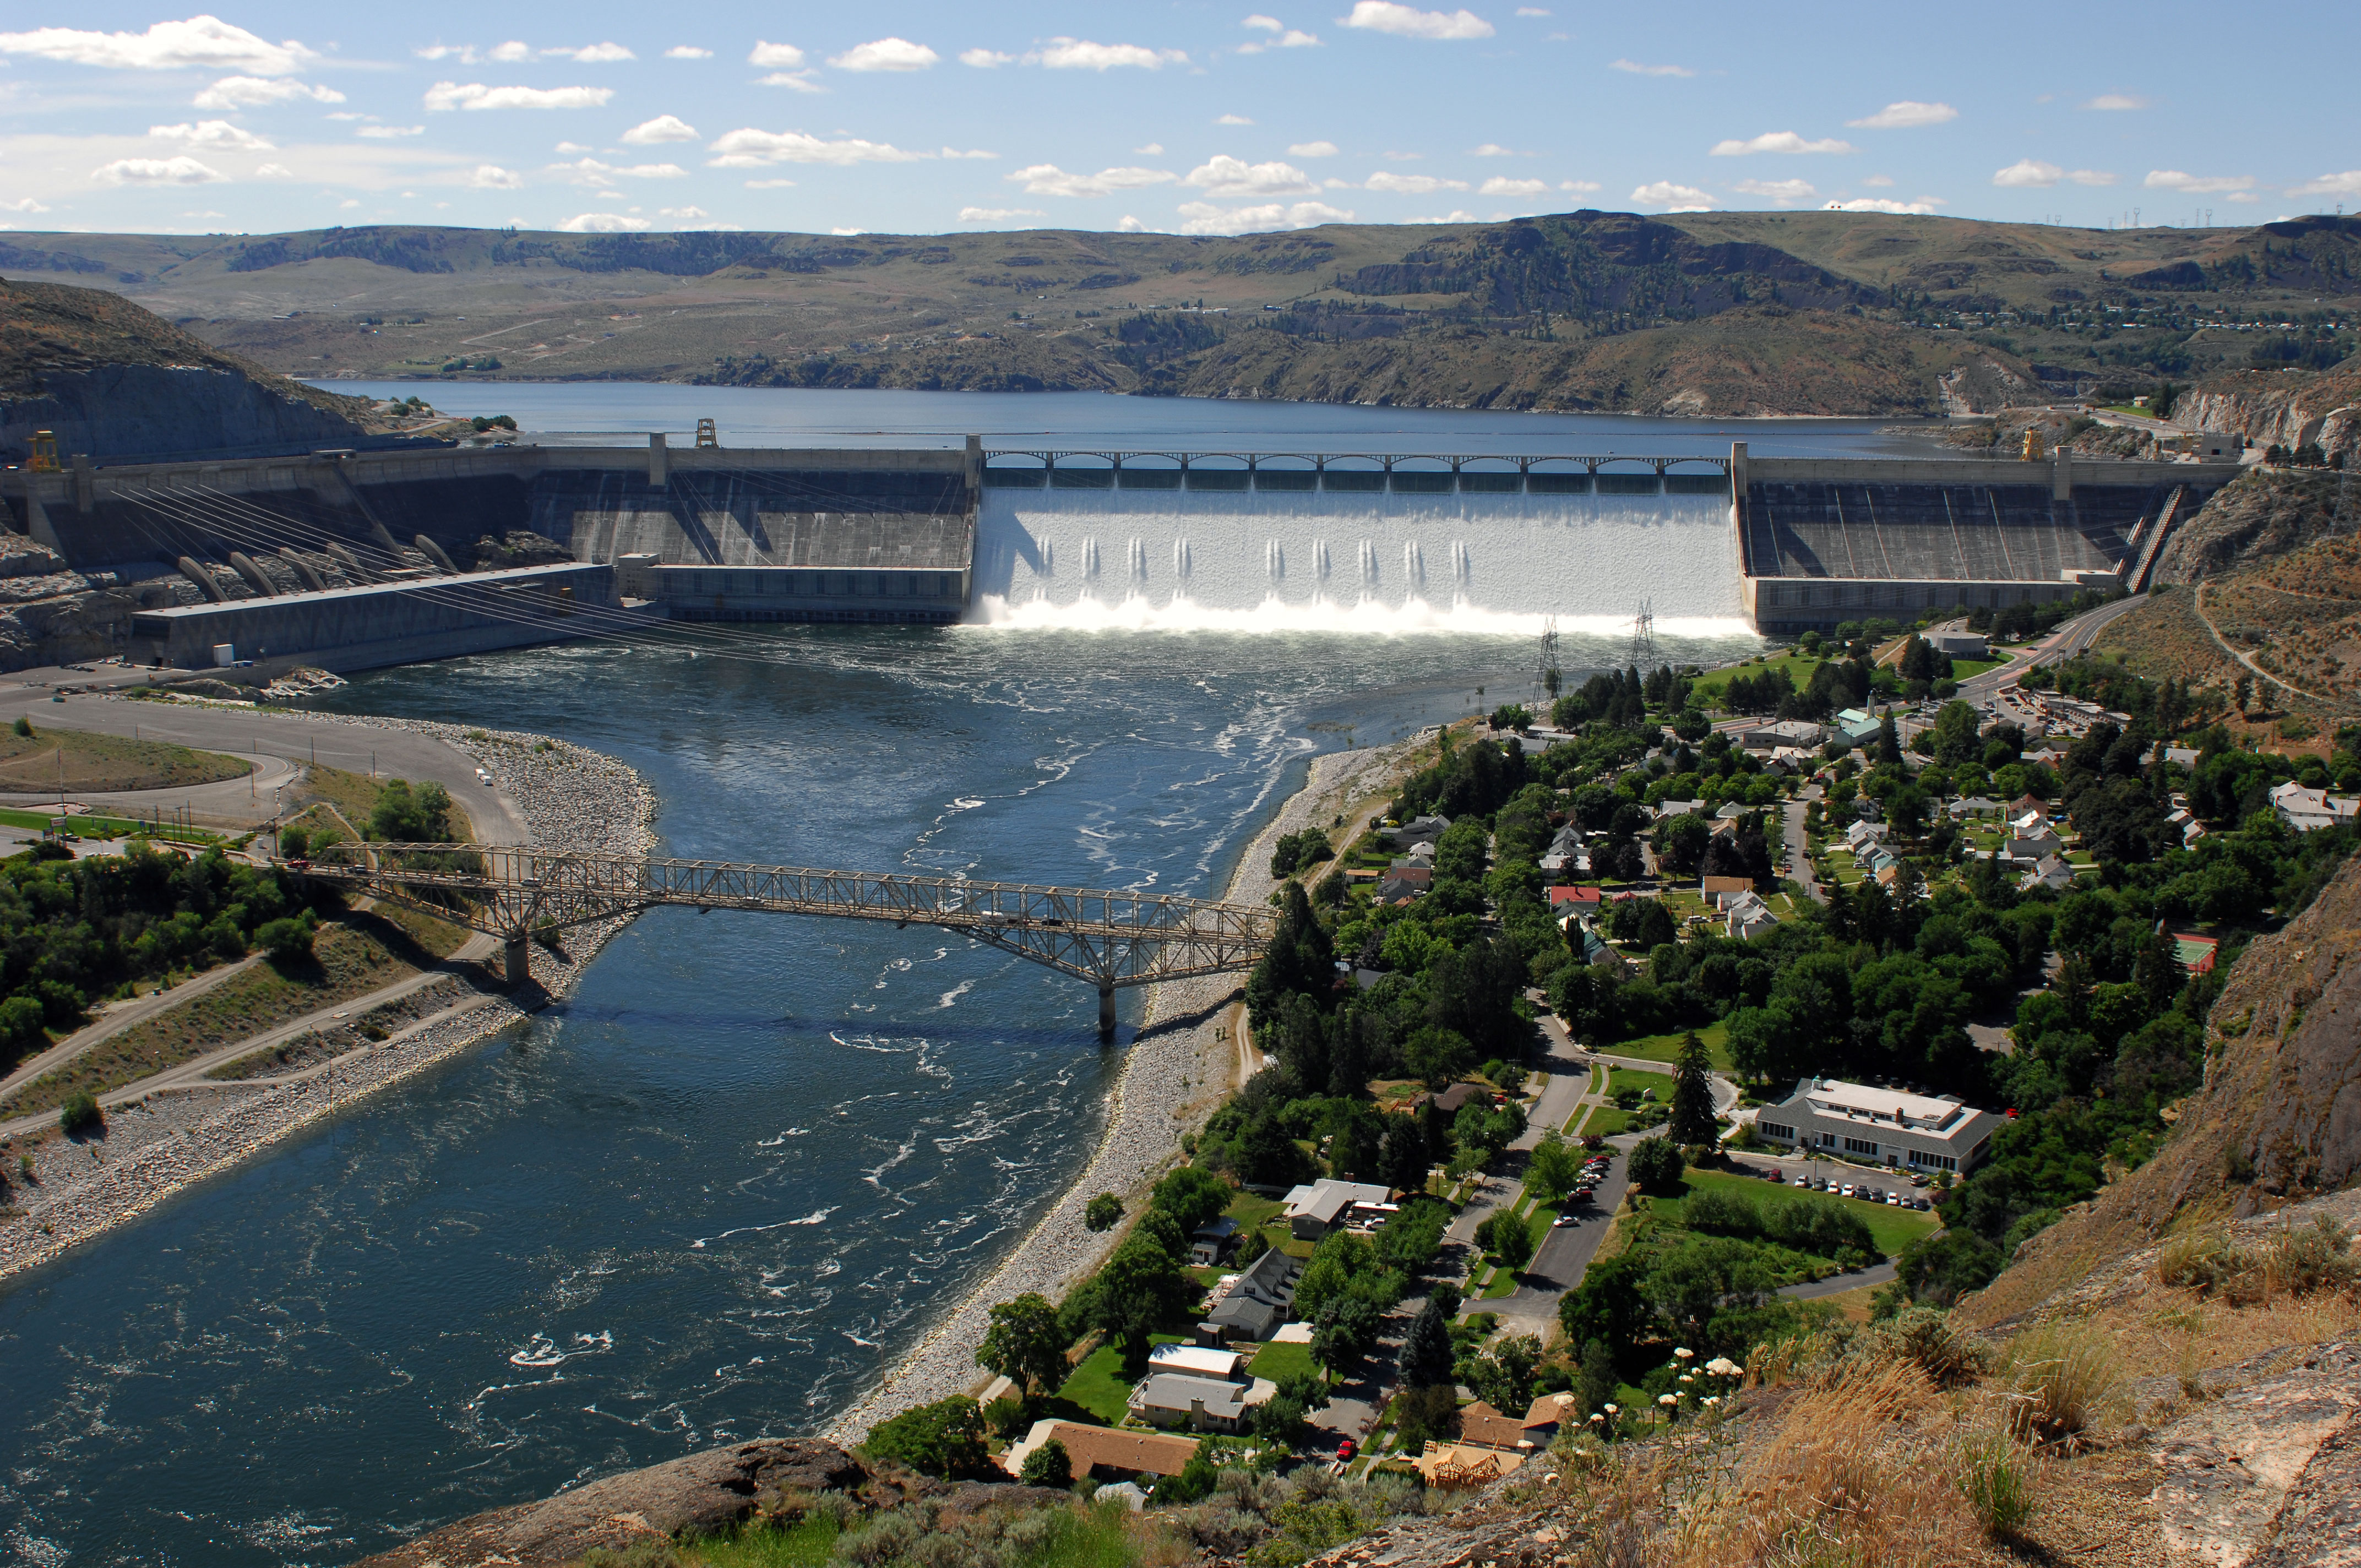 June 30, 2011. Grand Coulee Dam operators released over 200,000 cfs downstream during an unusually large and late spring runoff. The spillway is carrying 33,800 cfs, while 167,000 cfs through the hydropower generators.